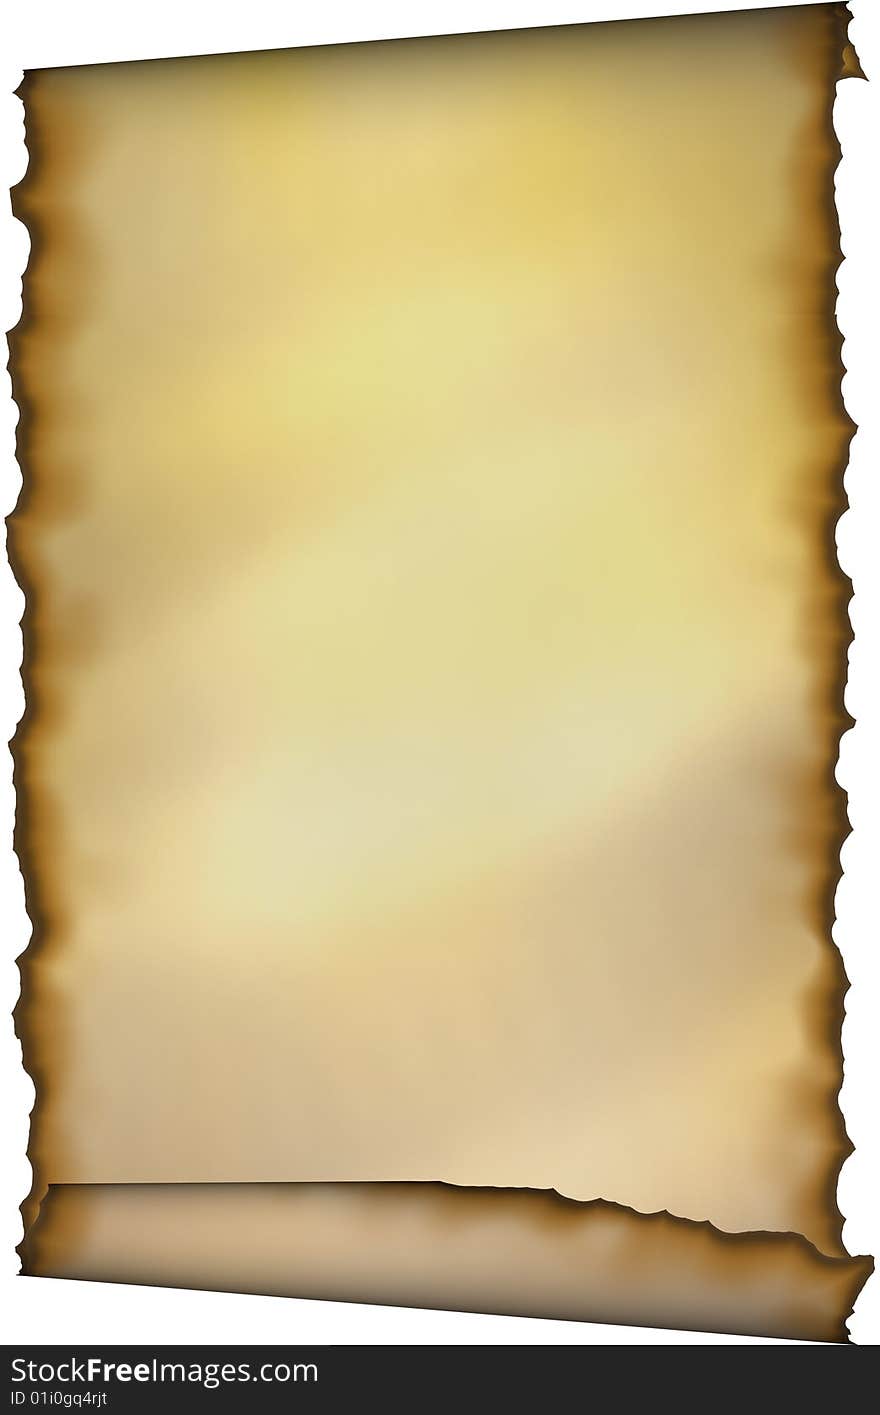 Old Scroll With Burnt Edges over White background